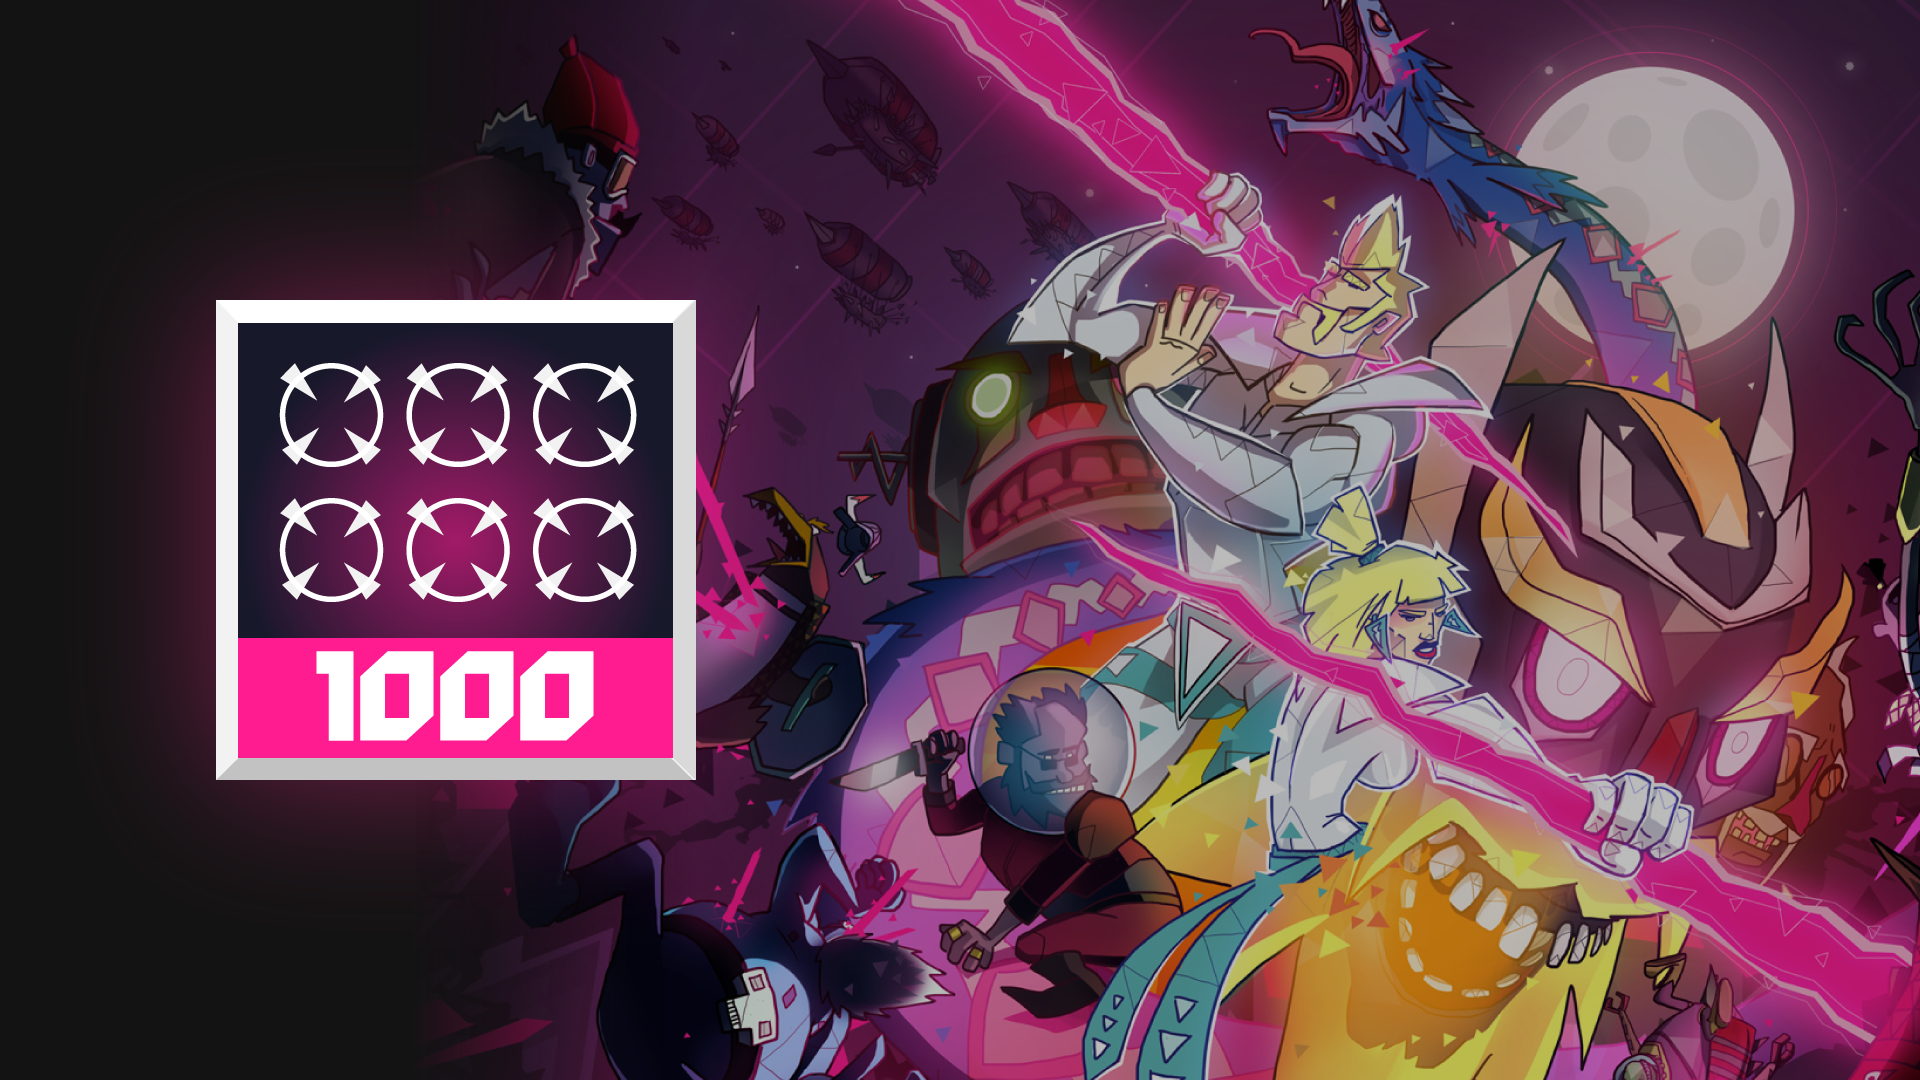 Icon for Killed a 1000 enemies